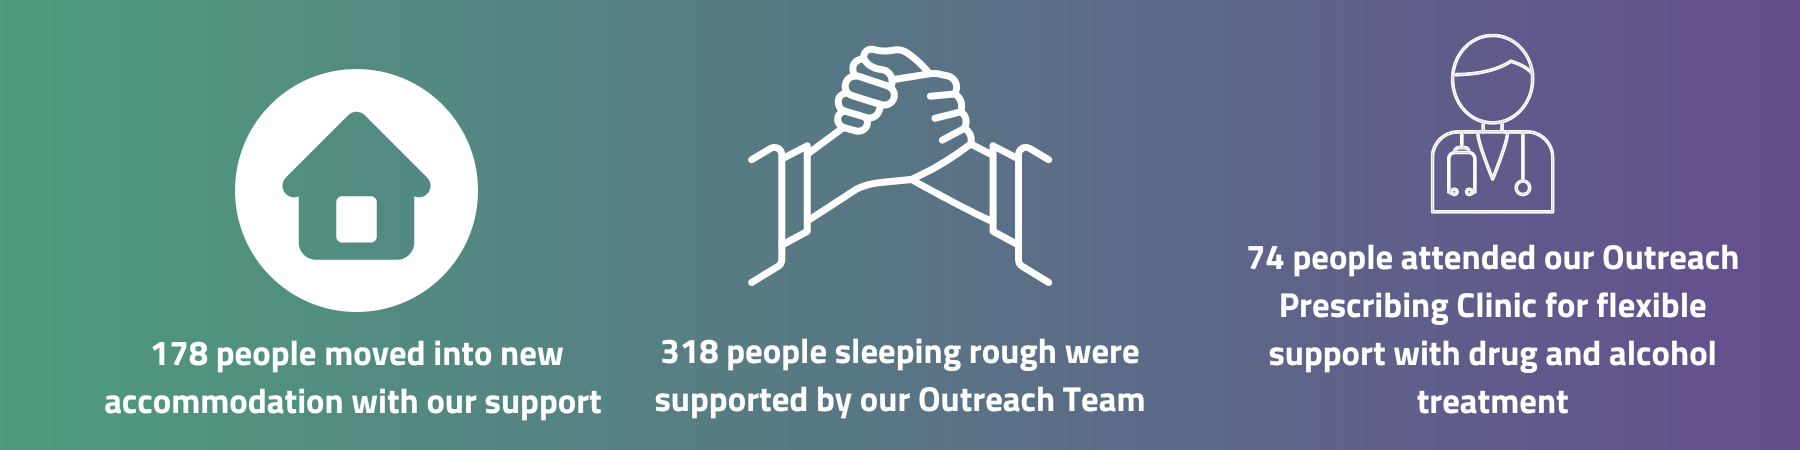 White text on green and purple background reads, 178 people moved into new accommodation with our support, 318 people sleeping rough were supported by Outreach Team, 74 people attended our Outreach Prescribing Clinic for flexible support with drug and alcohol treatment